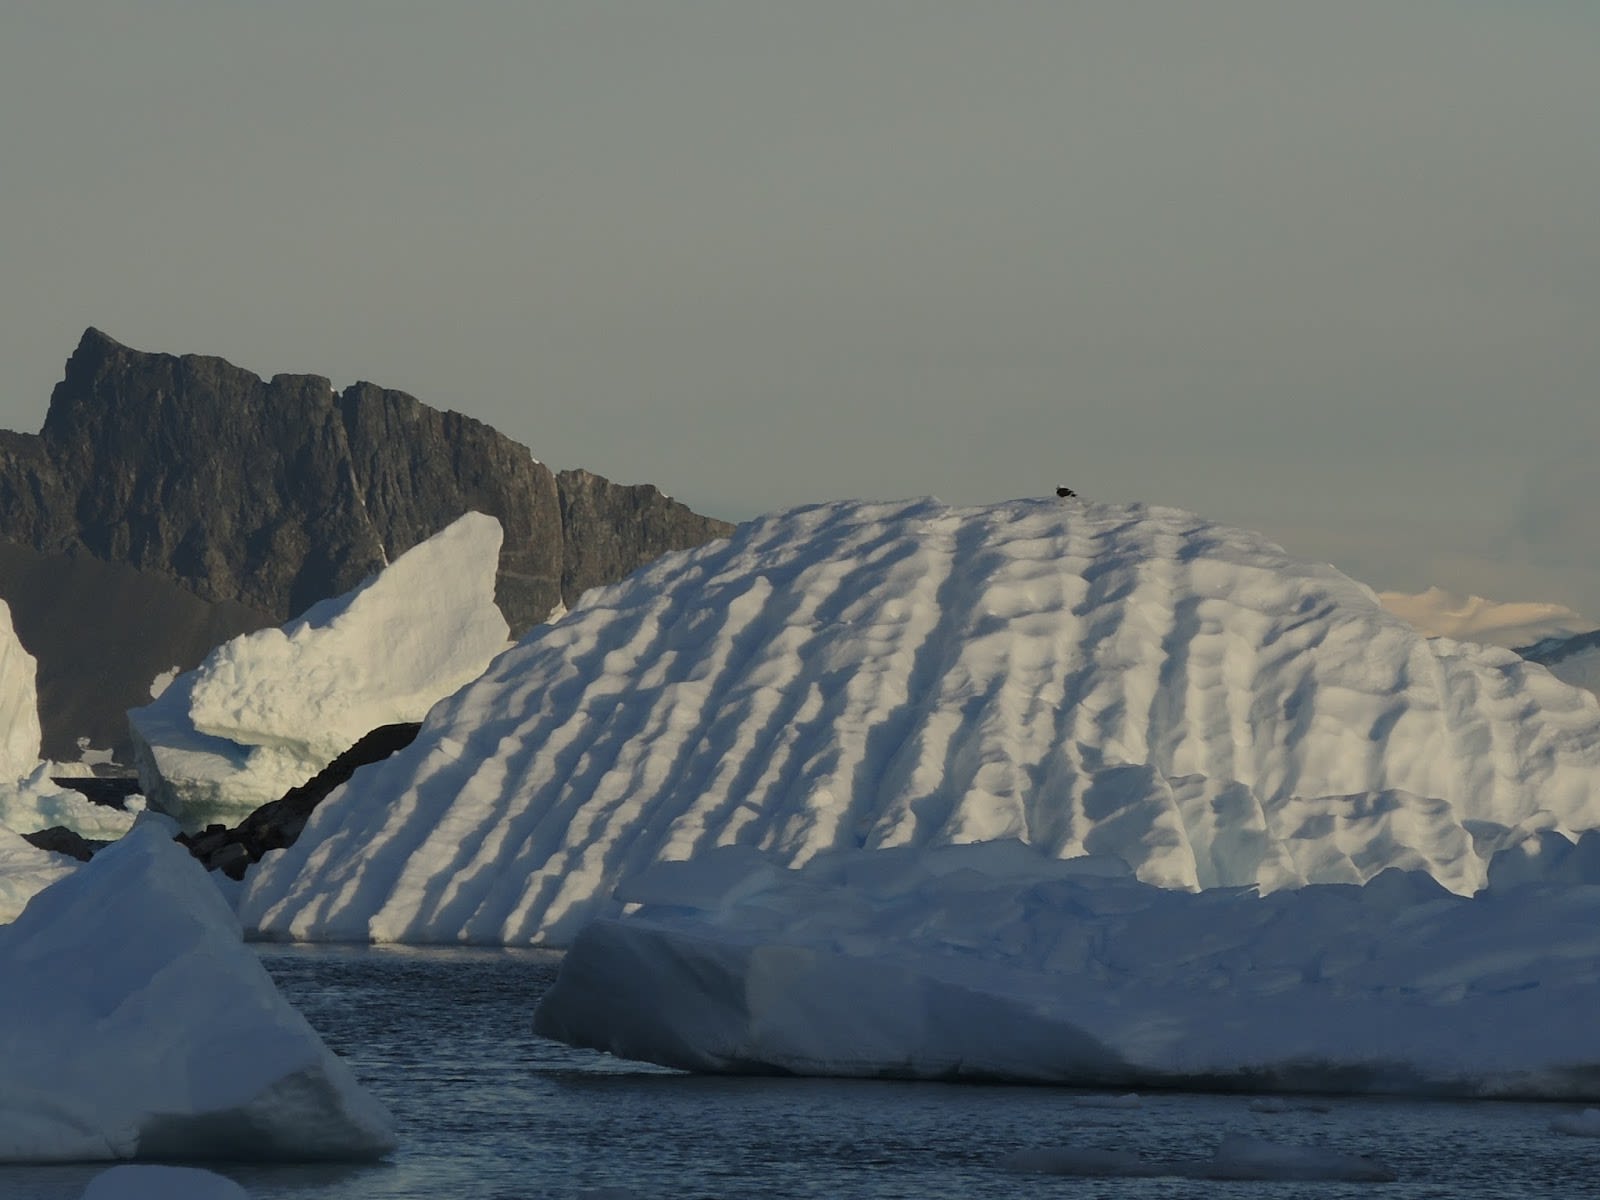 An iceberg with scratch marks from the sea bed